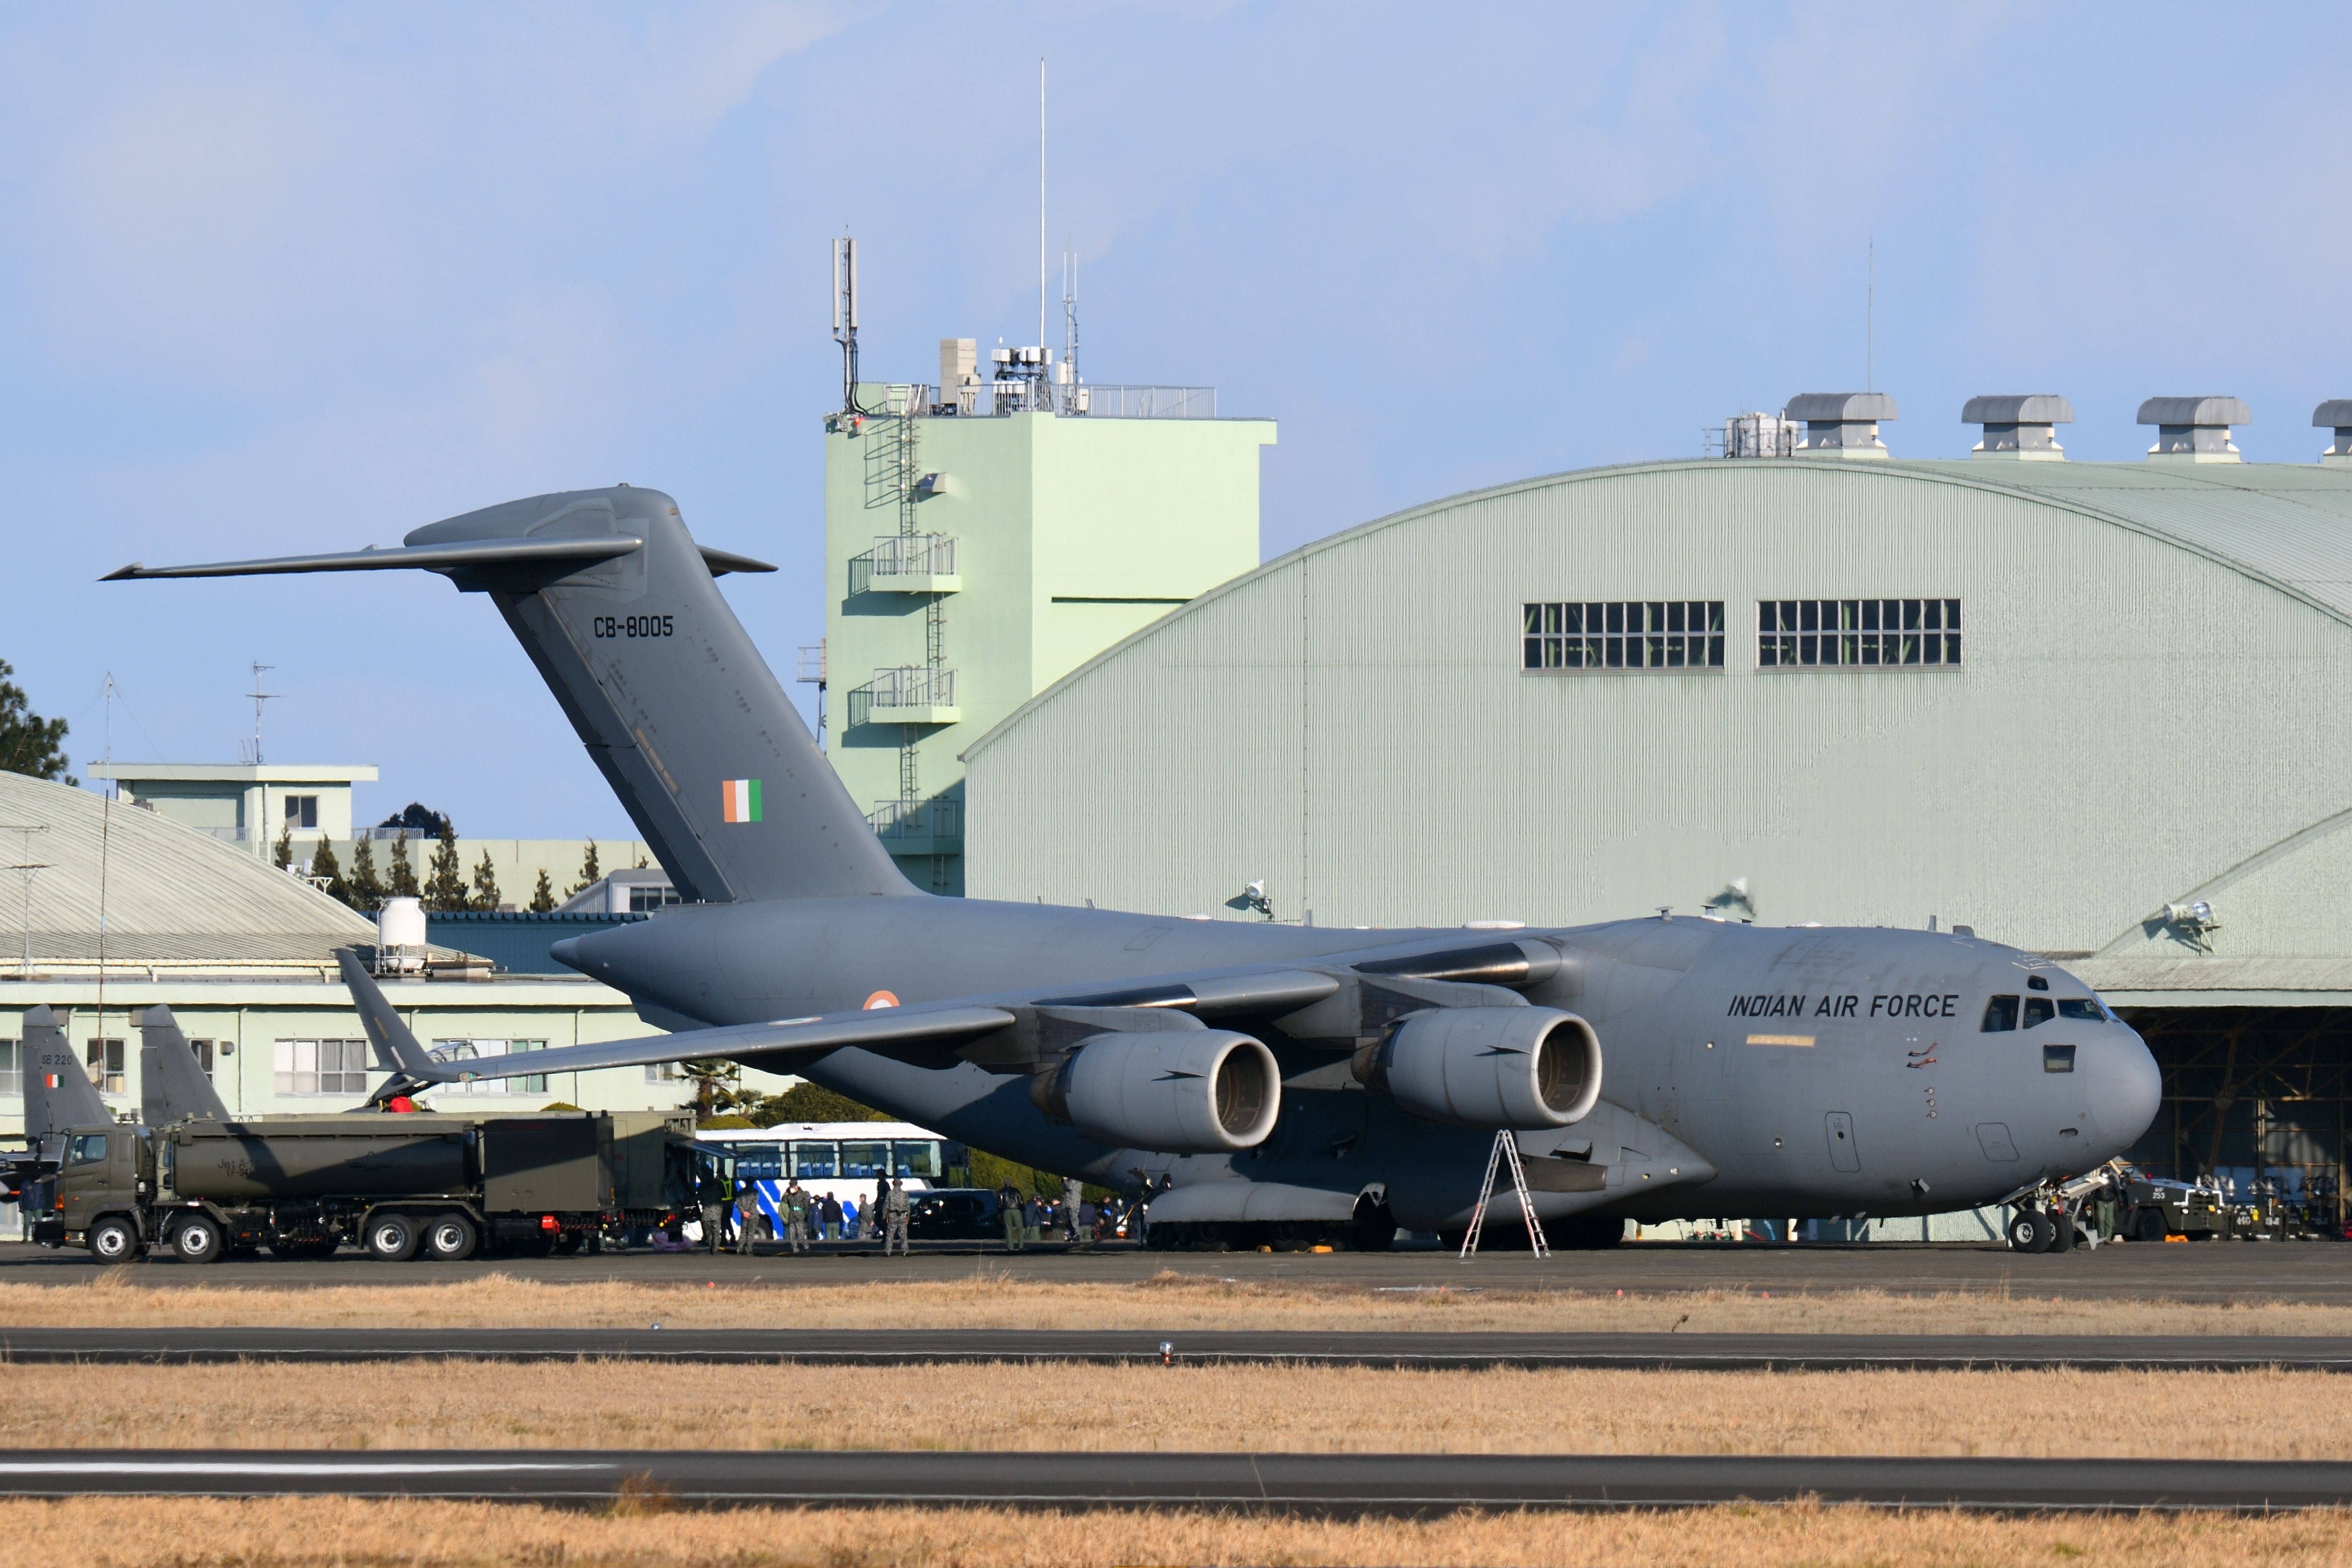 An India Air Force C-17 Globemaster III parked at an airfield.